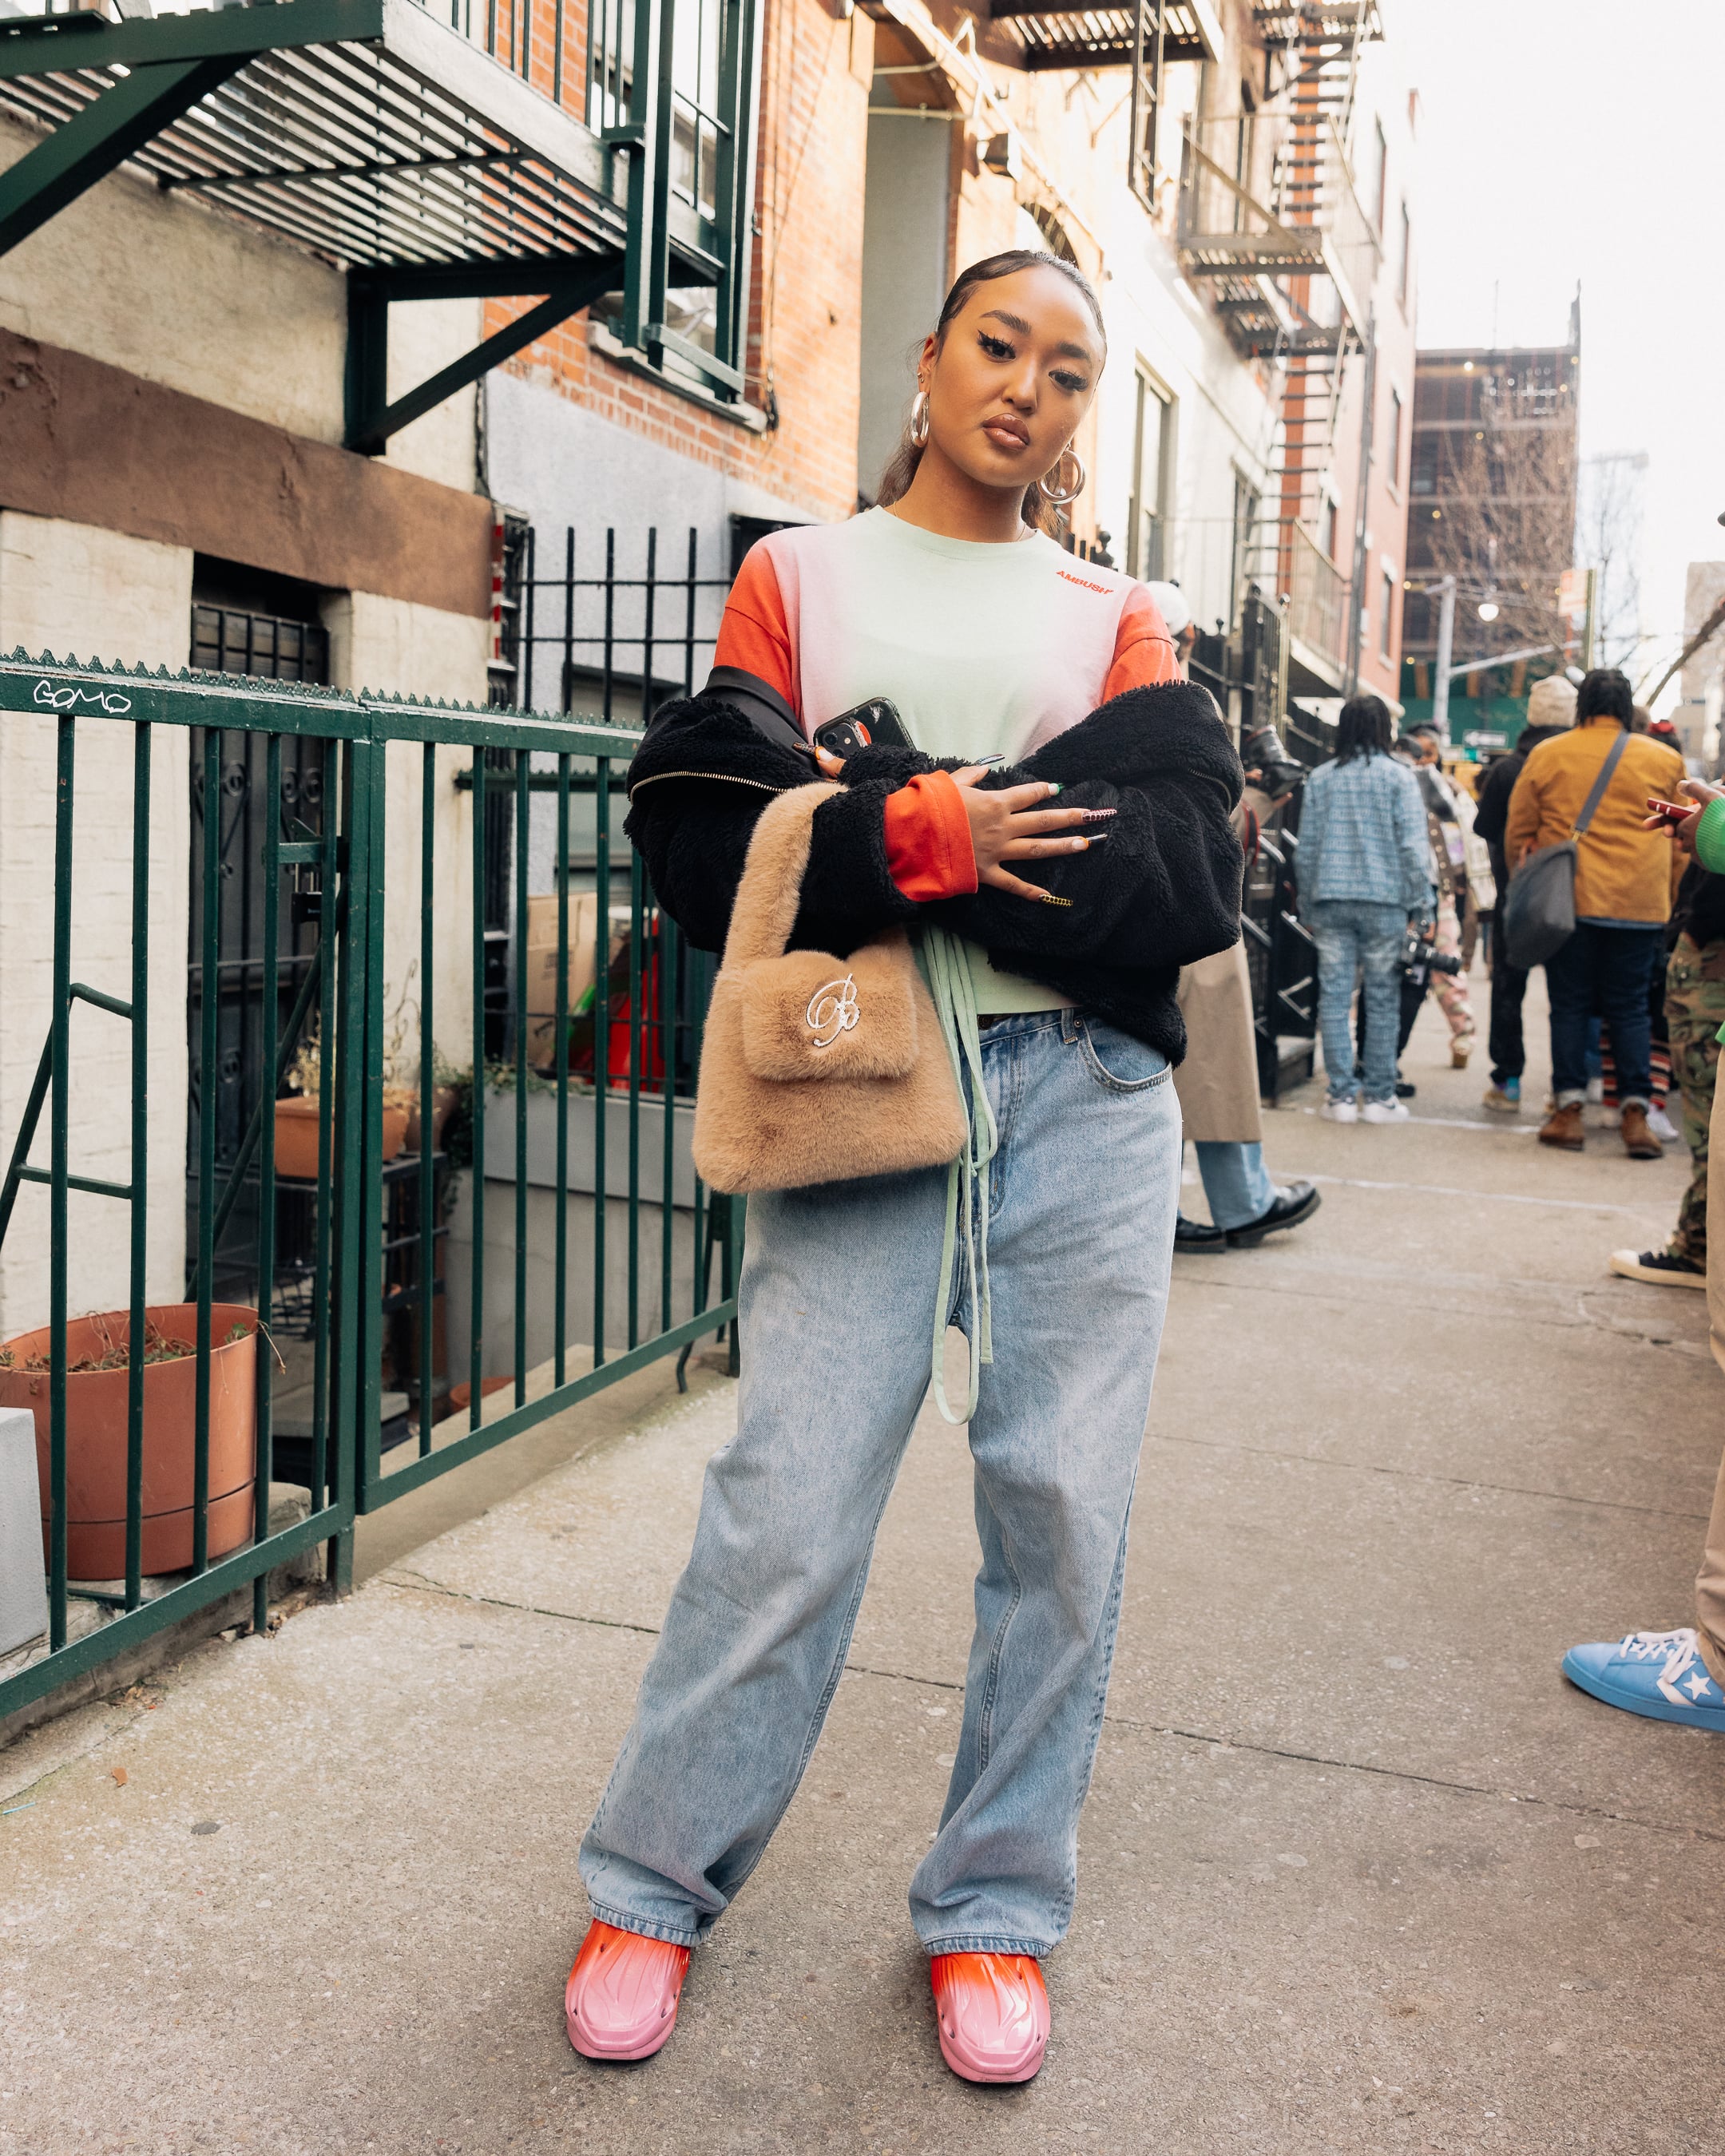 15 Tips To Pair Baggy Jeans Outfit For Your Day To Day Outings